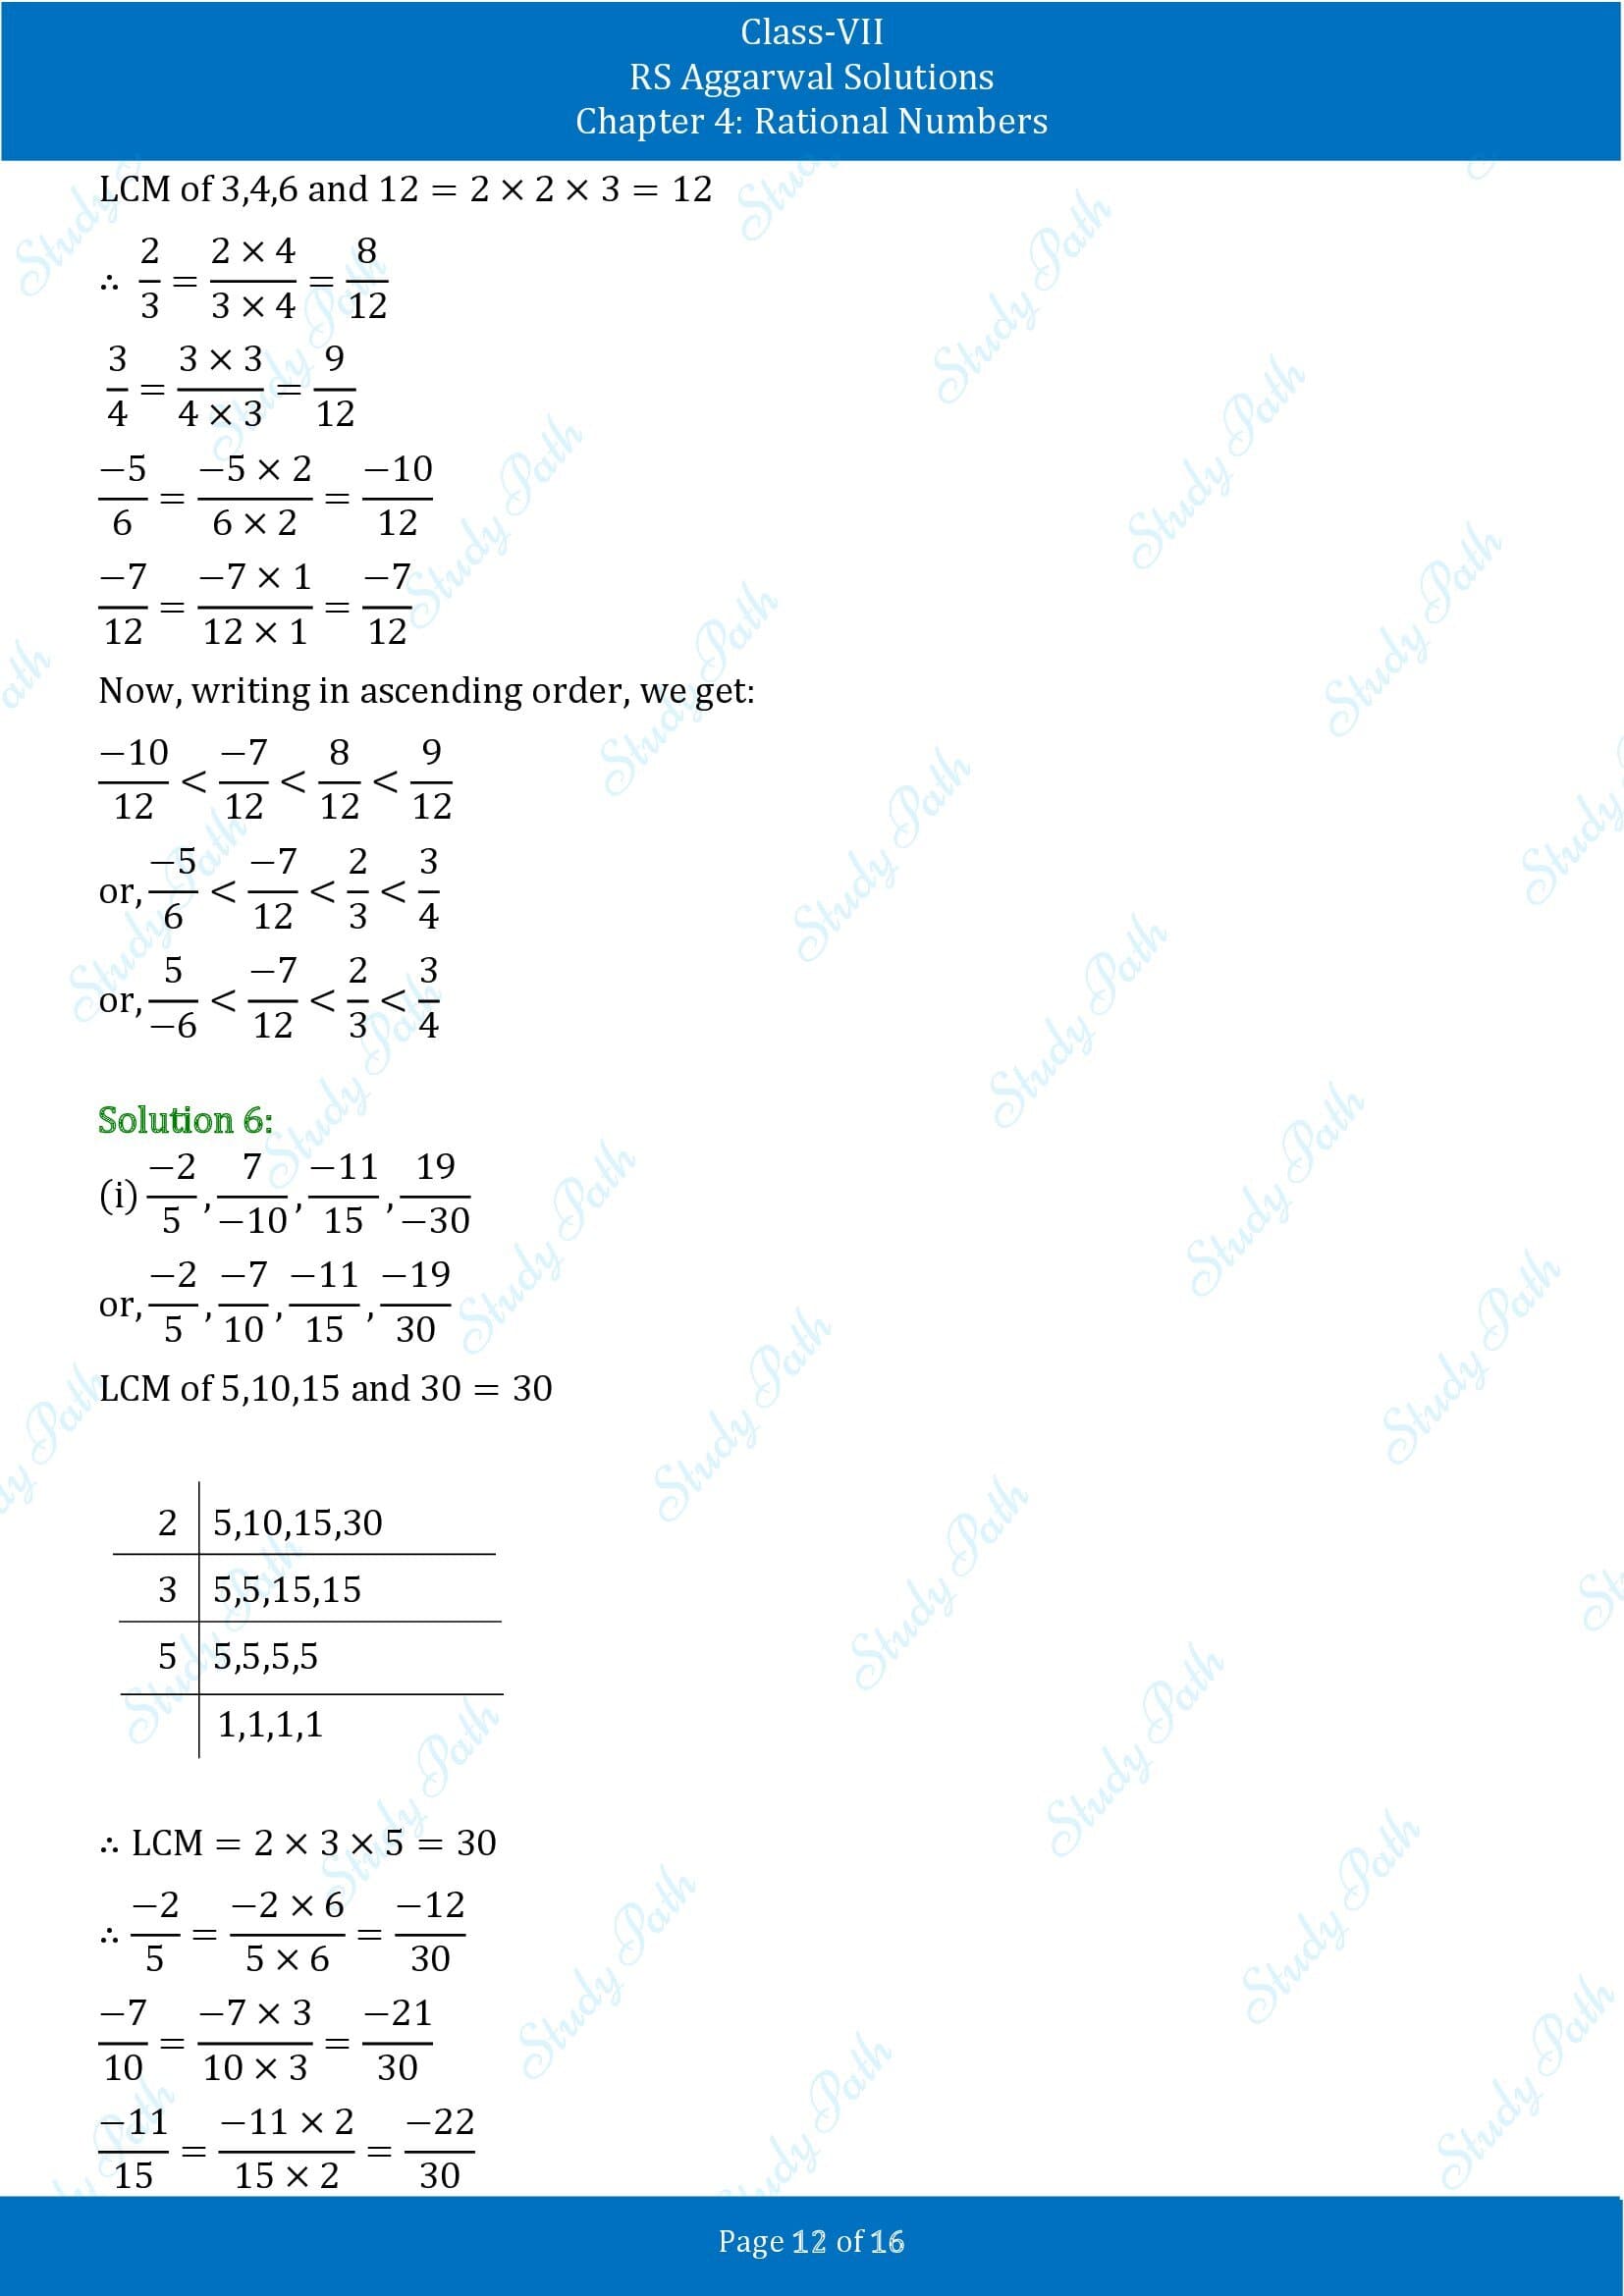 RS Aggarwal Solutions Class 7 Chapter 4 Rational Numbers Exercise 4B 00012